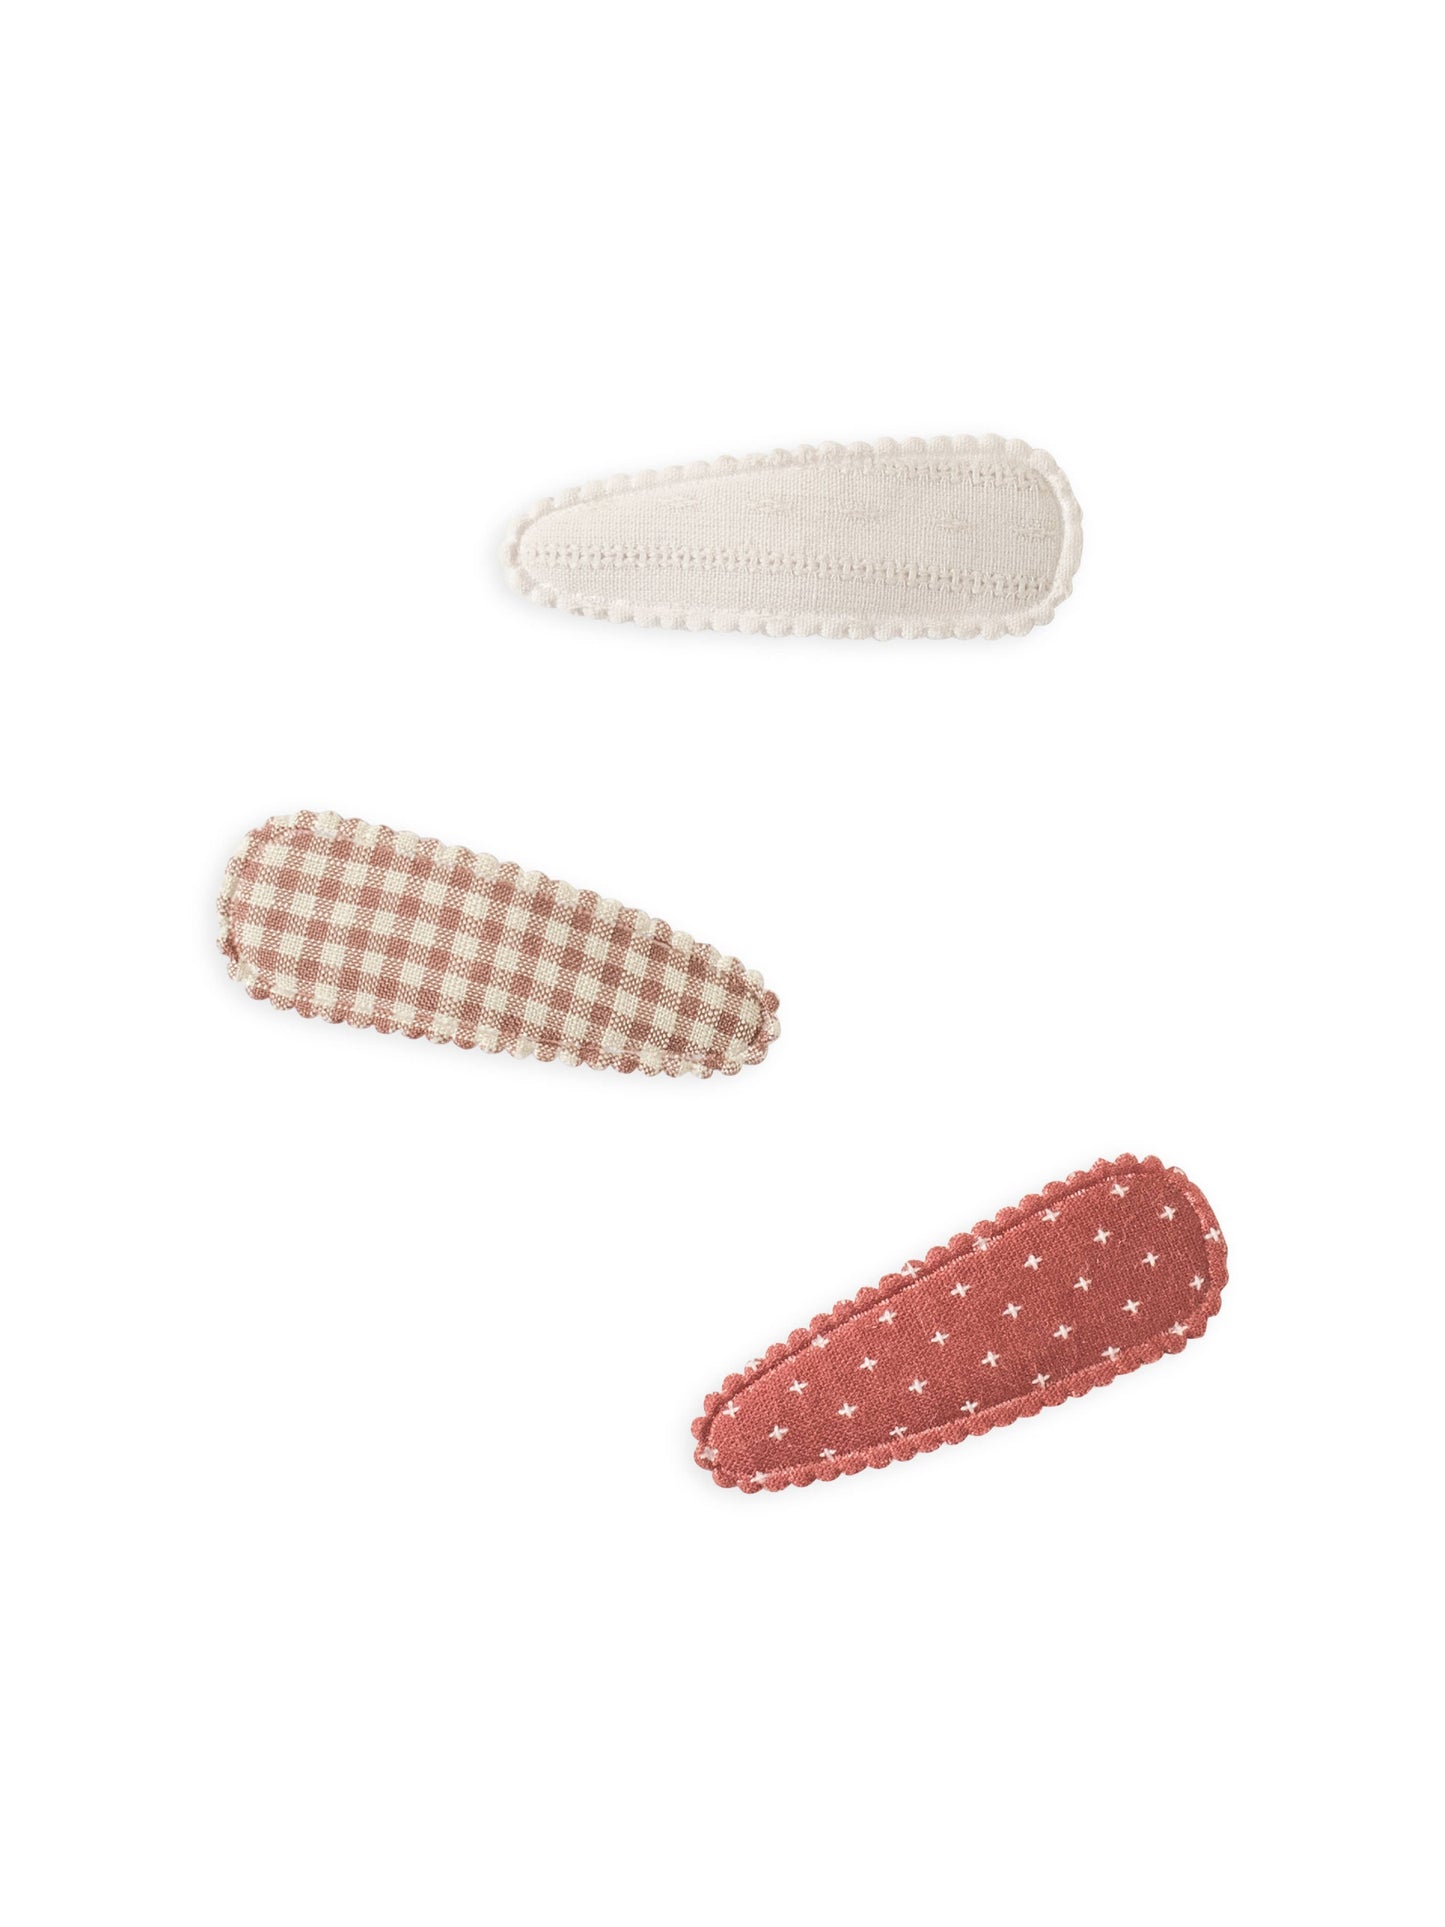 Colored Organics - Baby Hair Clips 3 Pack - Walnut Gingham